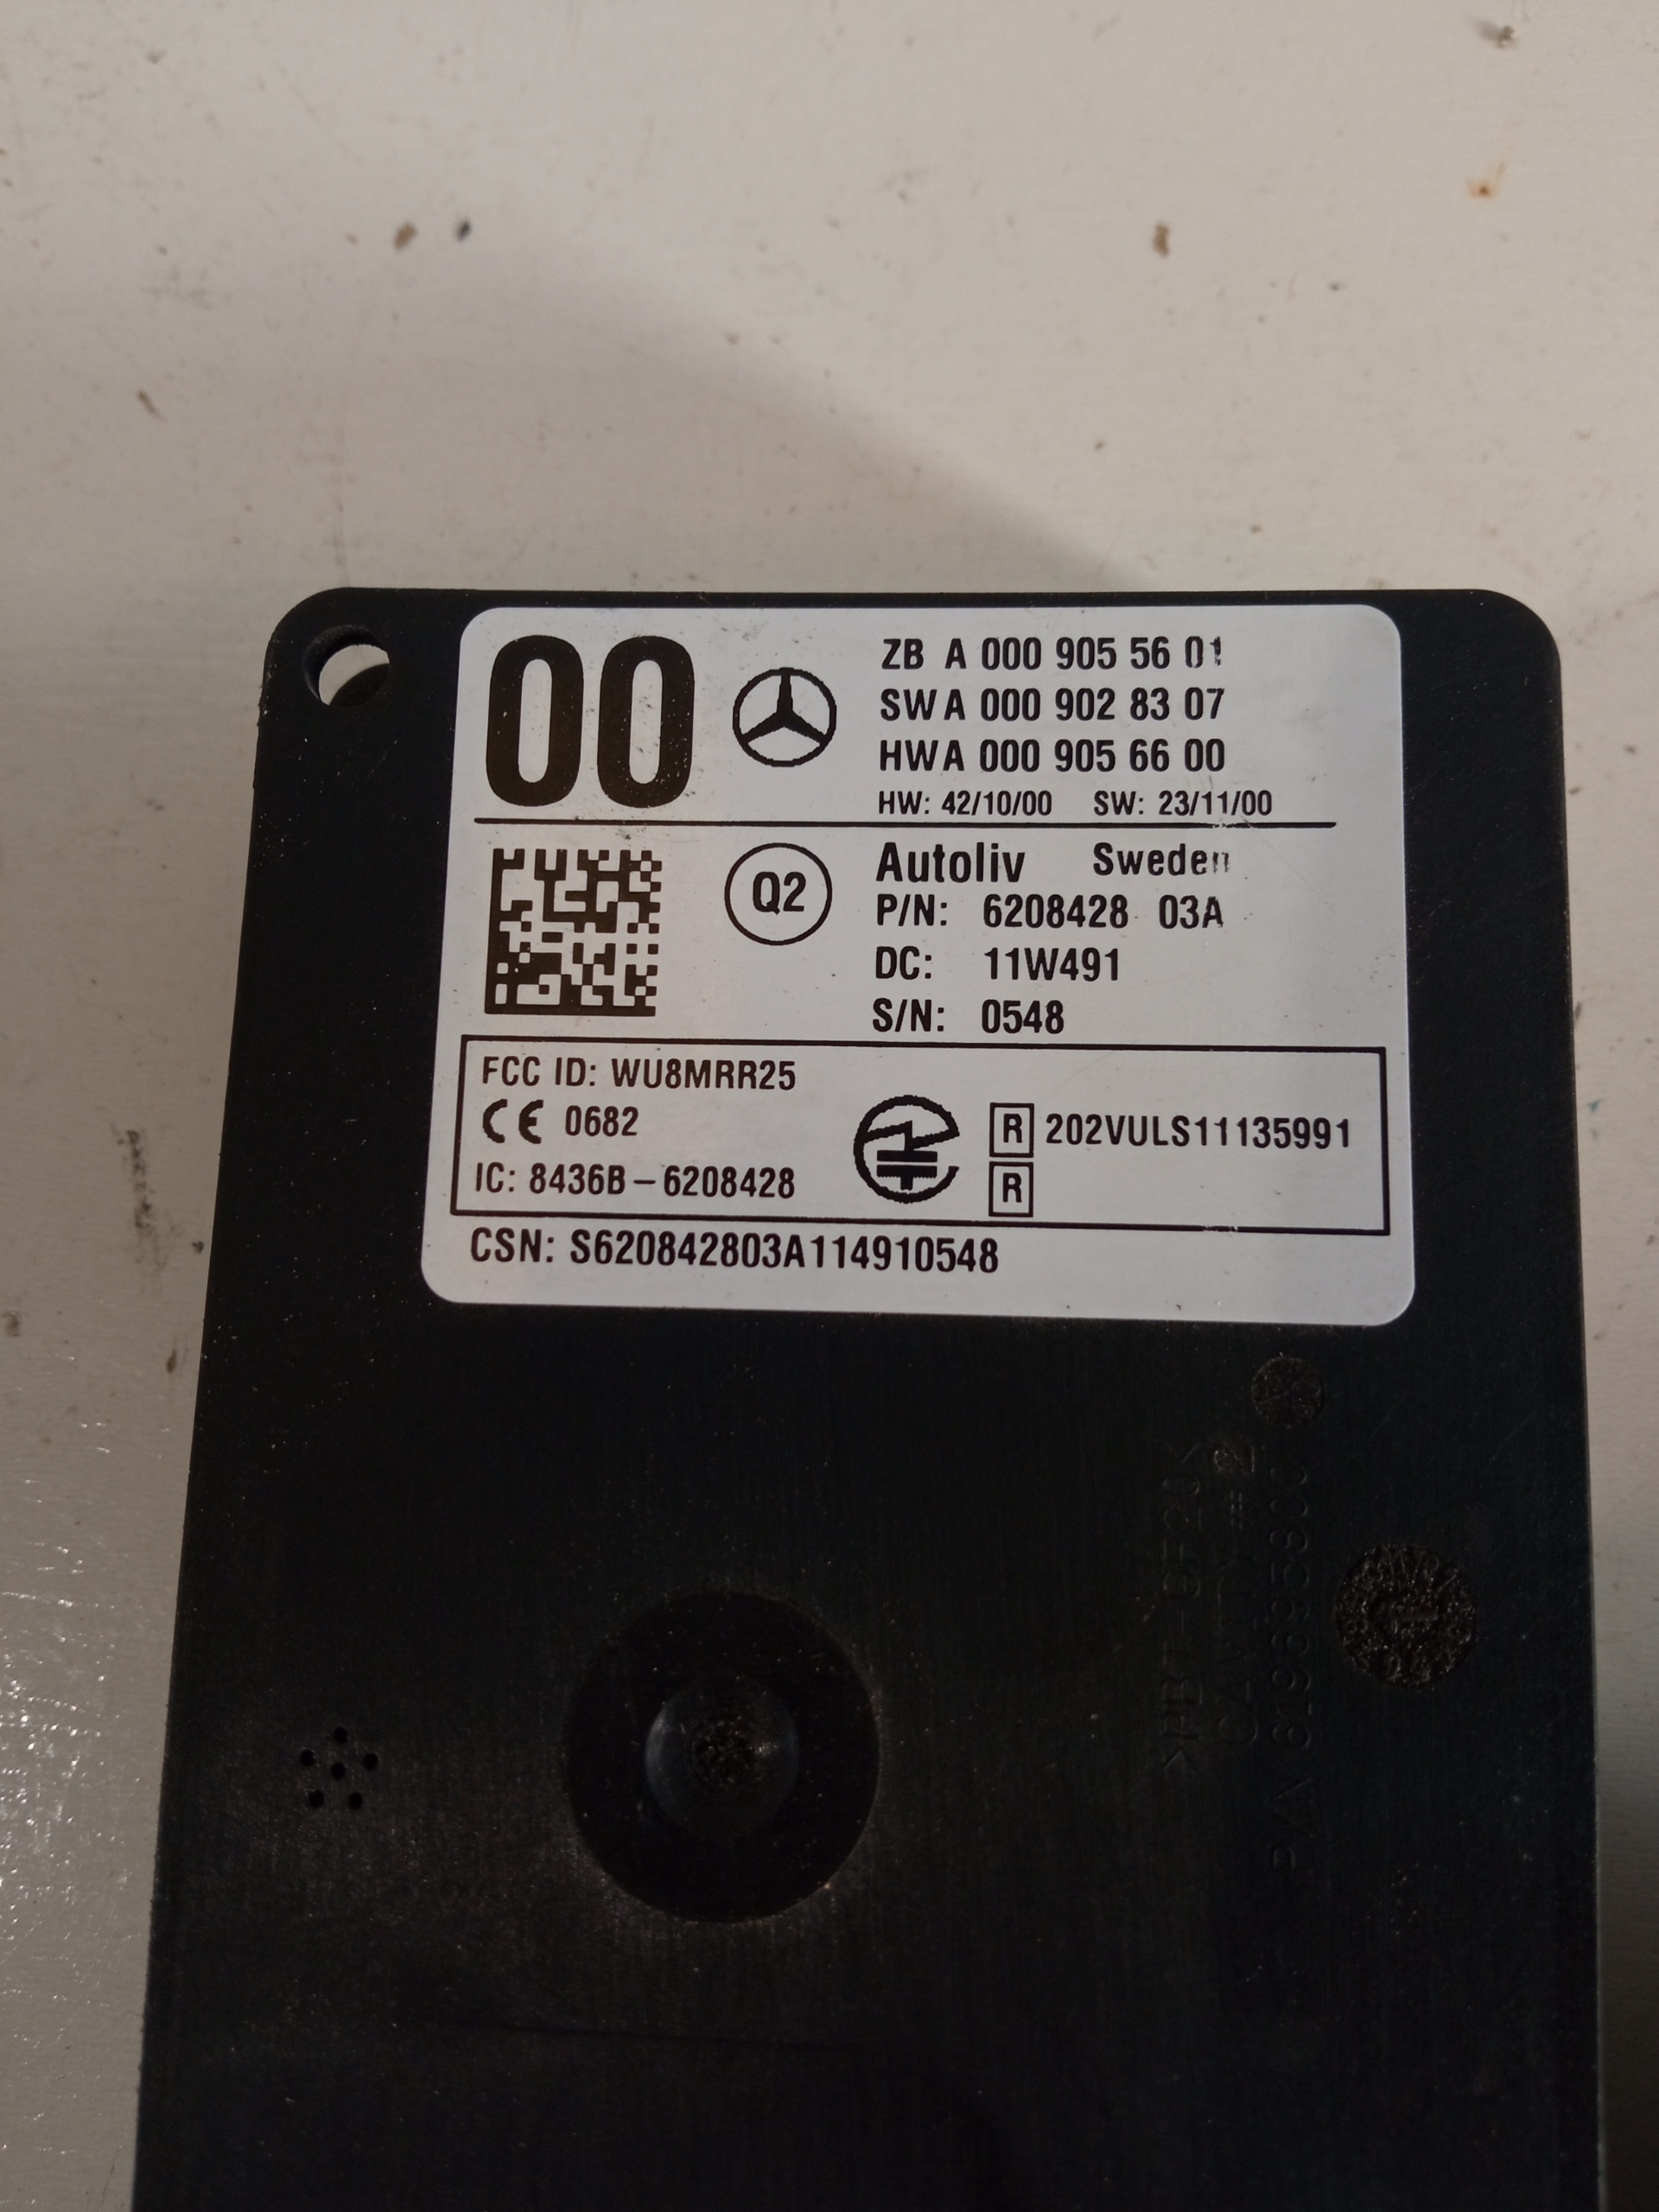 MERCEDES-BENZ B-Class W246 (2011-2020) Other Control Units A0009028307, 6PINES 22387635